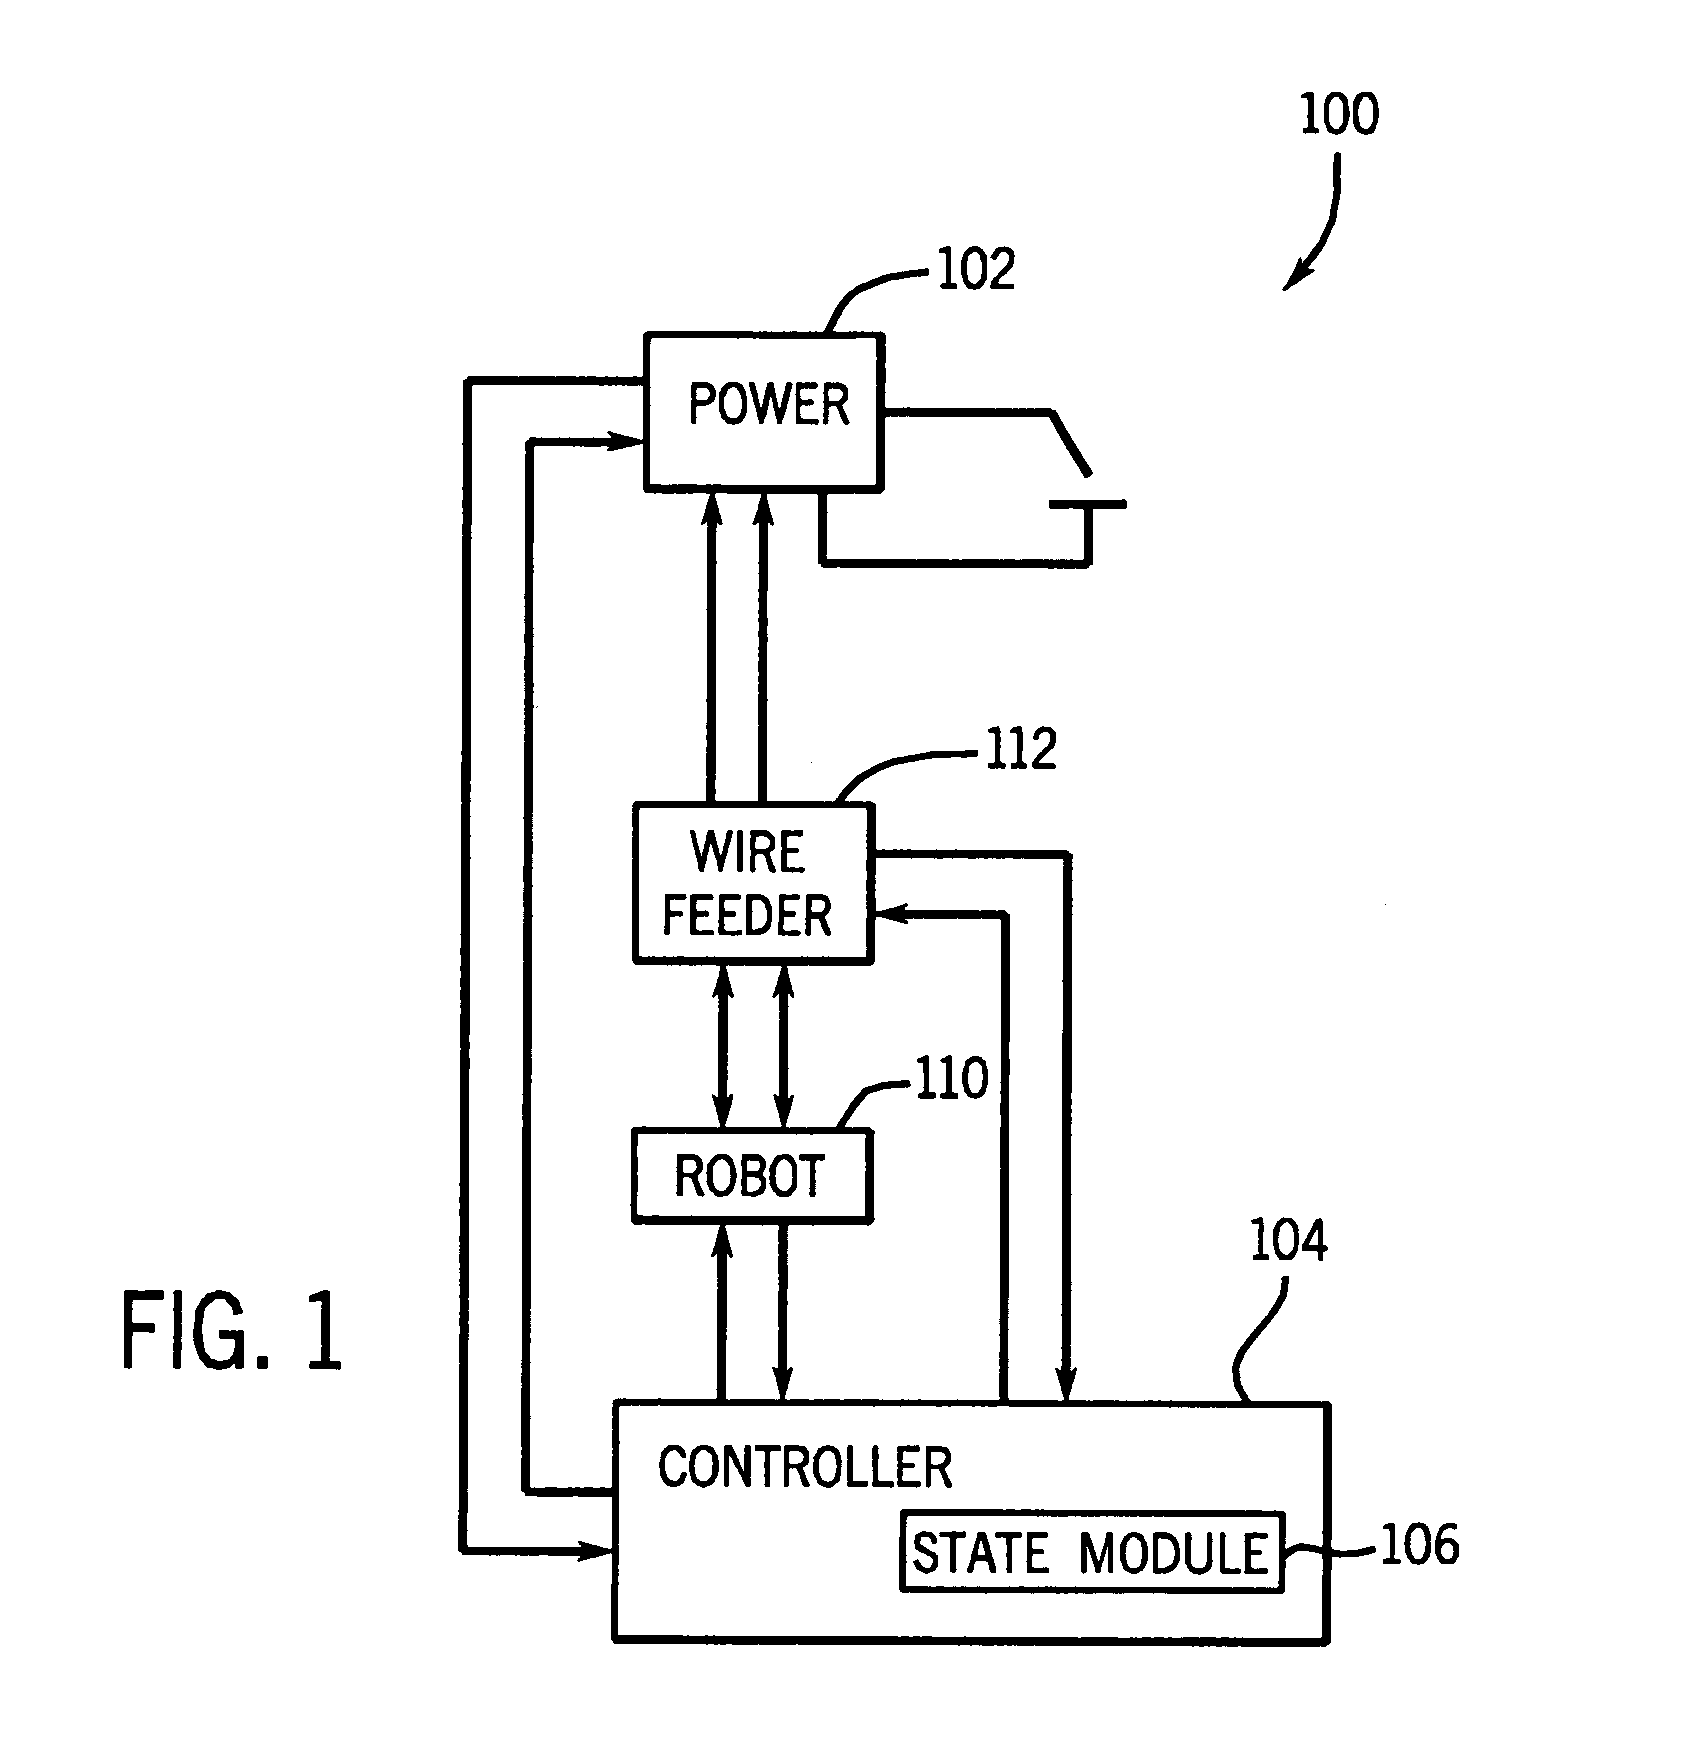 Welding-type power supply with a state-based controller